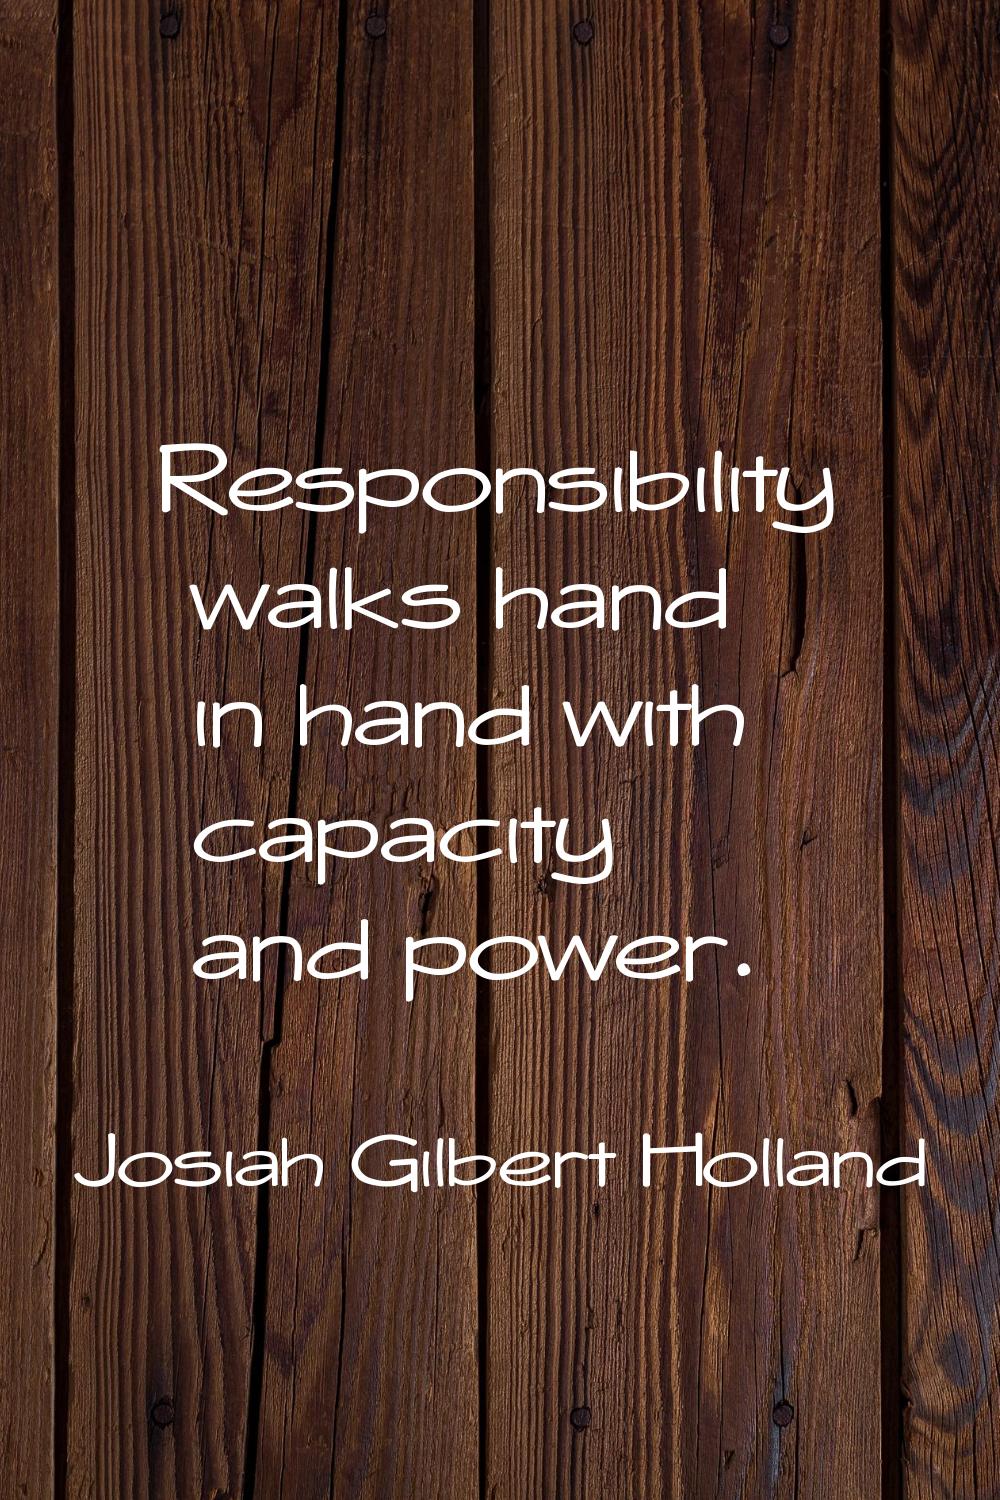 Responsibility walks hand in hand with capacity and power.